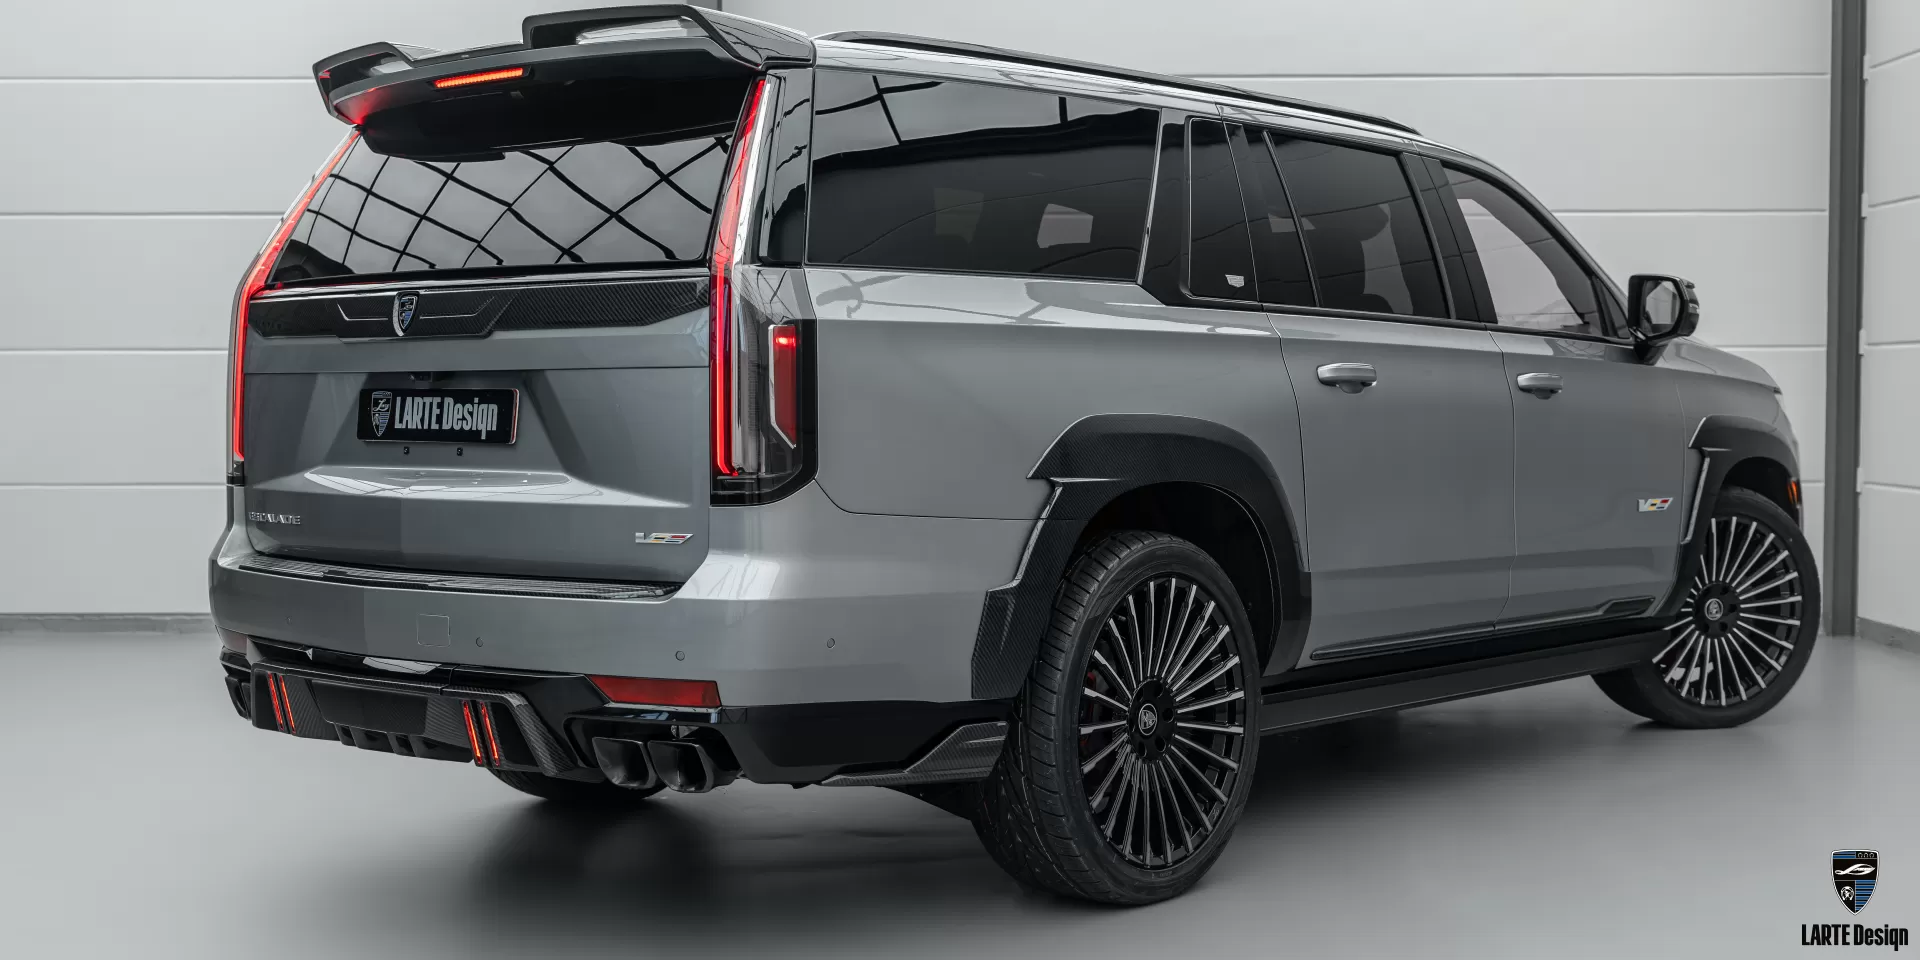 Cadillac Escalade-V ESV body kit details: roof spoiler, rear arch extensions, and custom rims